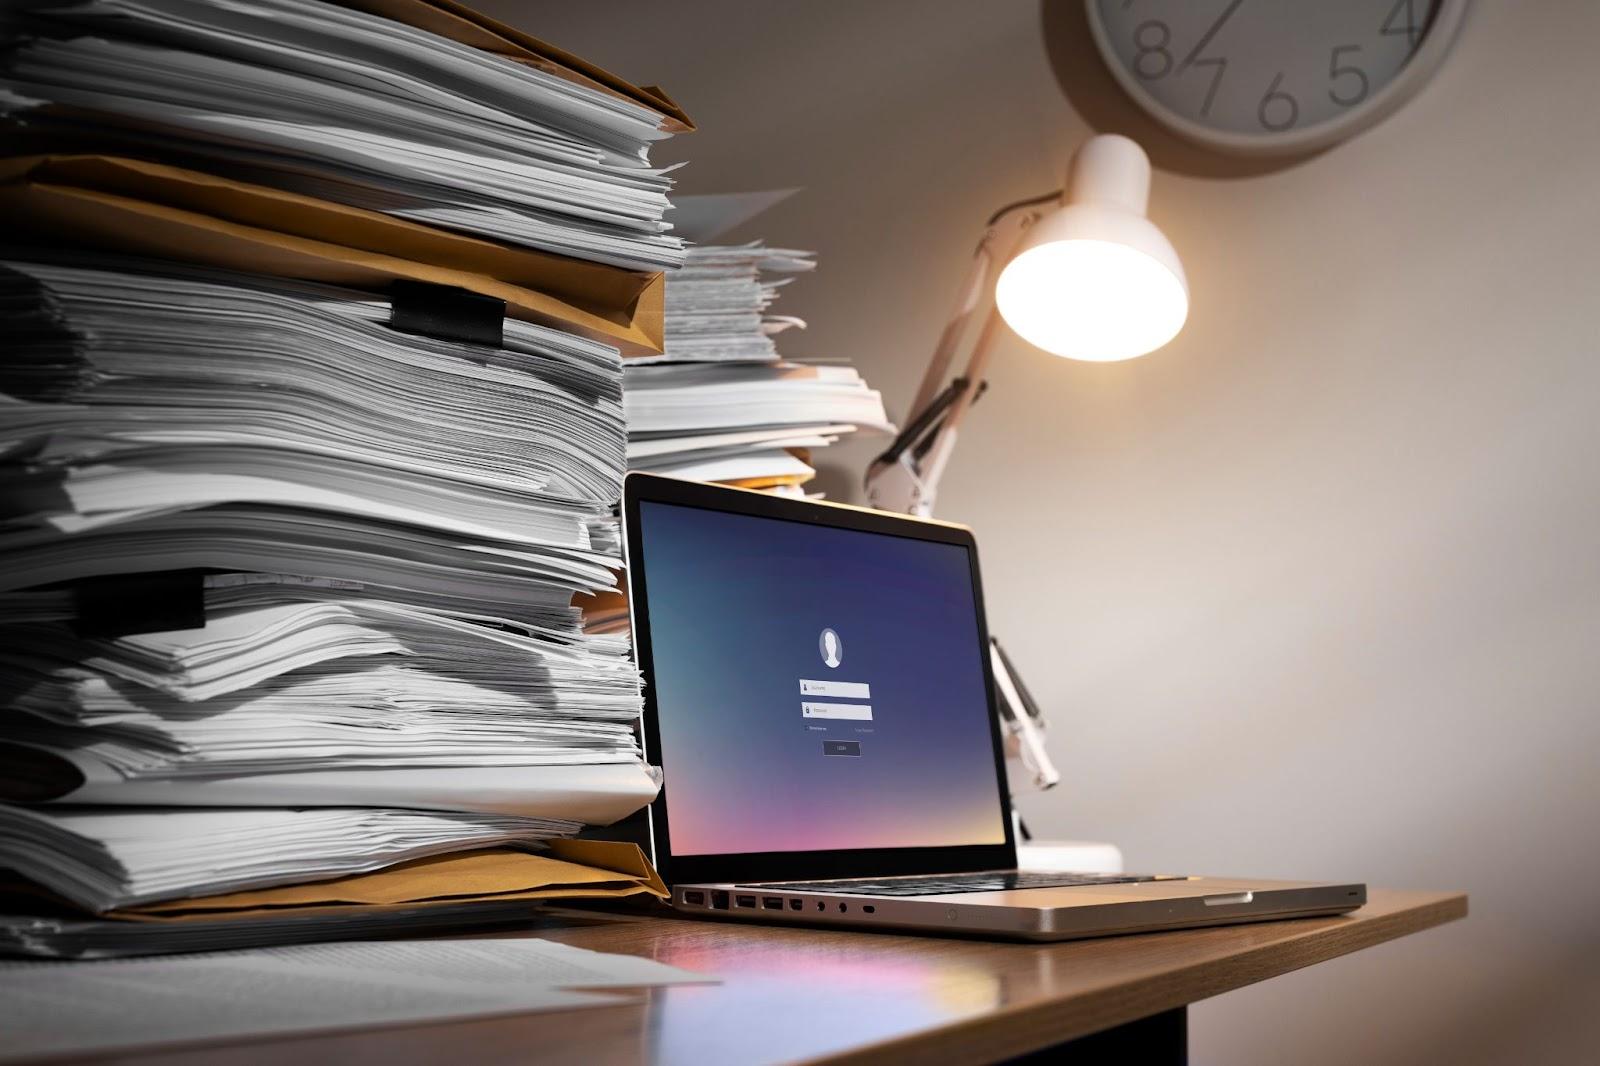 Traditional Document Processing Vs Intelligent Document Processing 